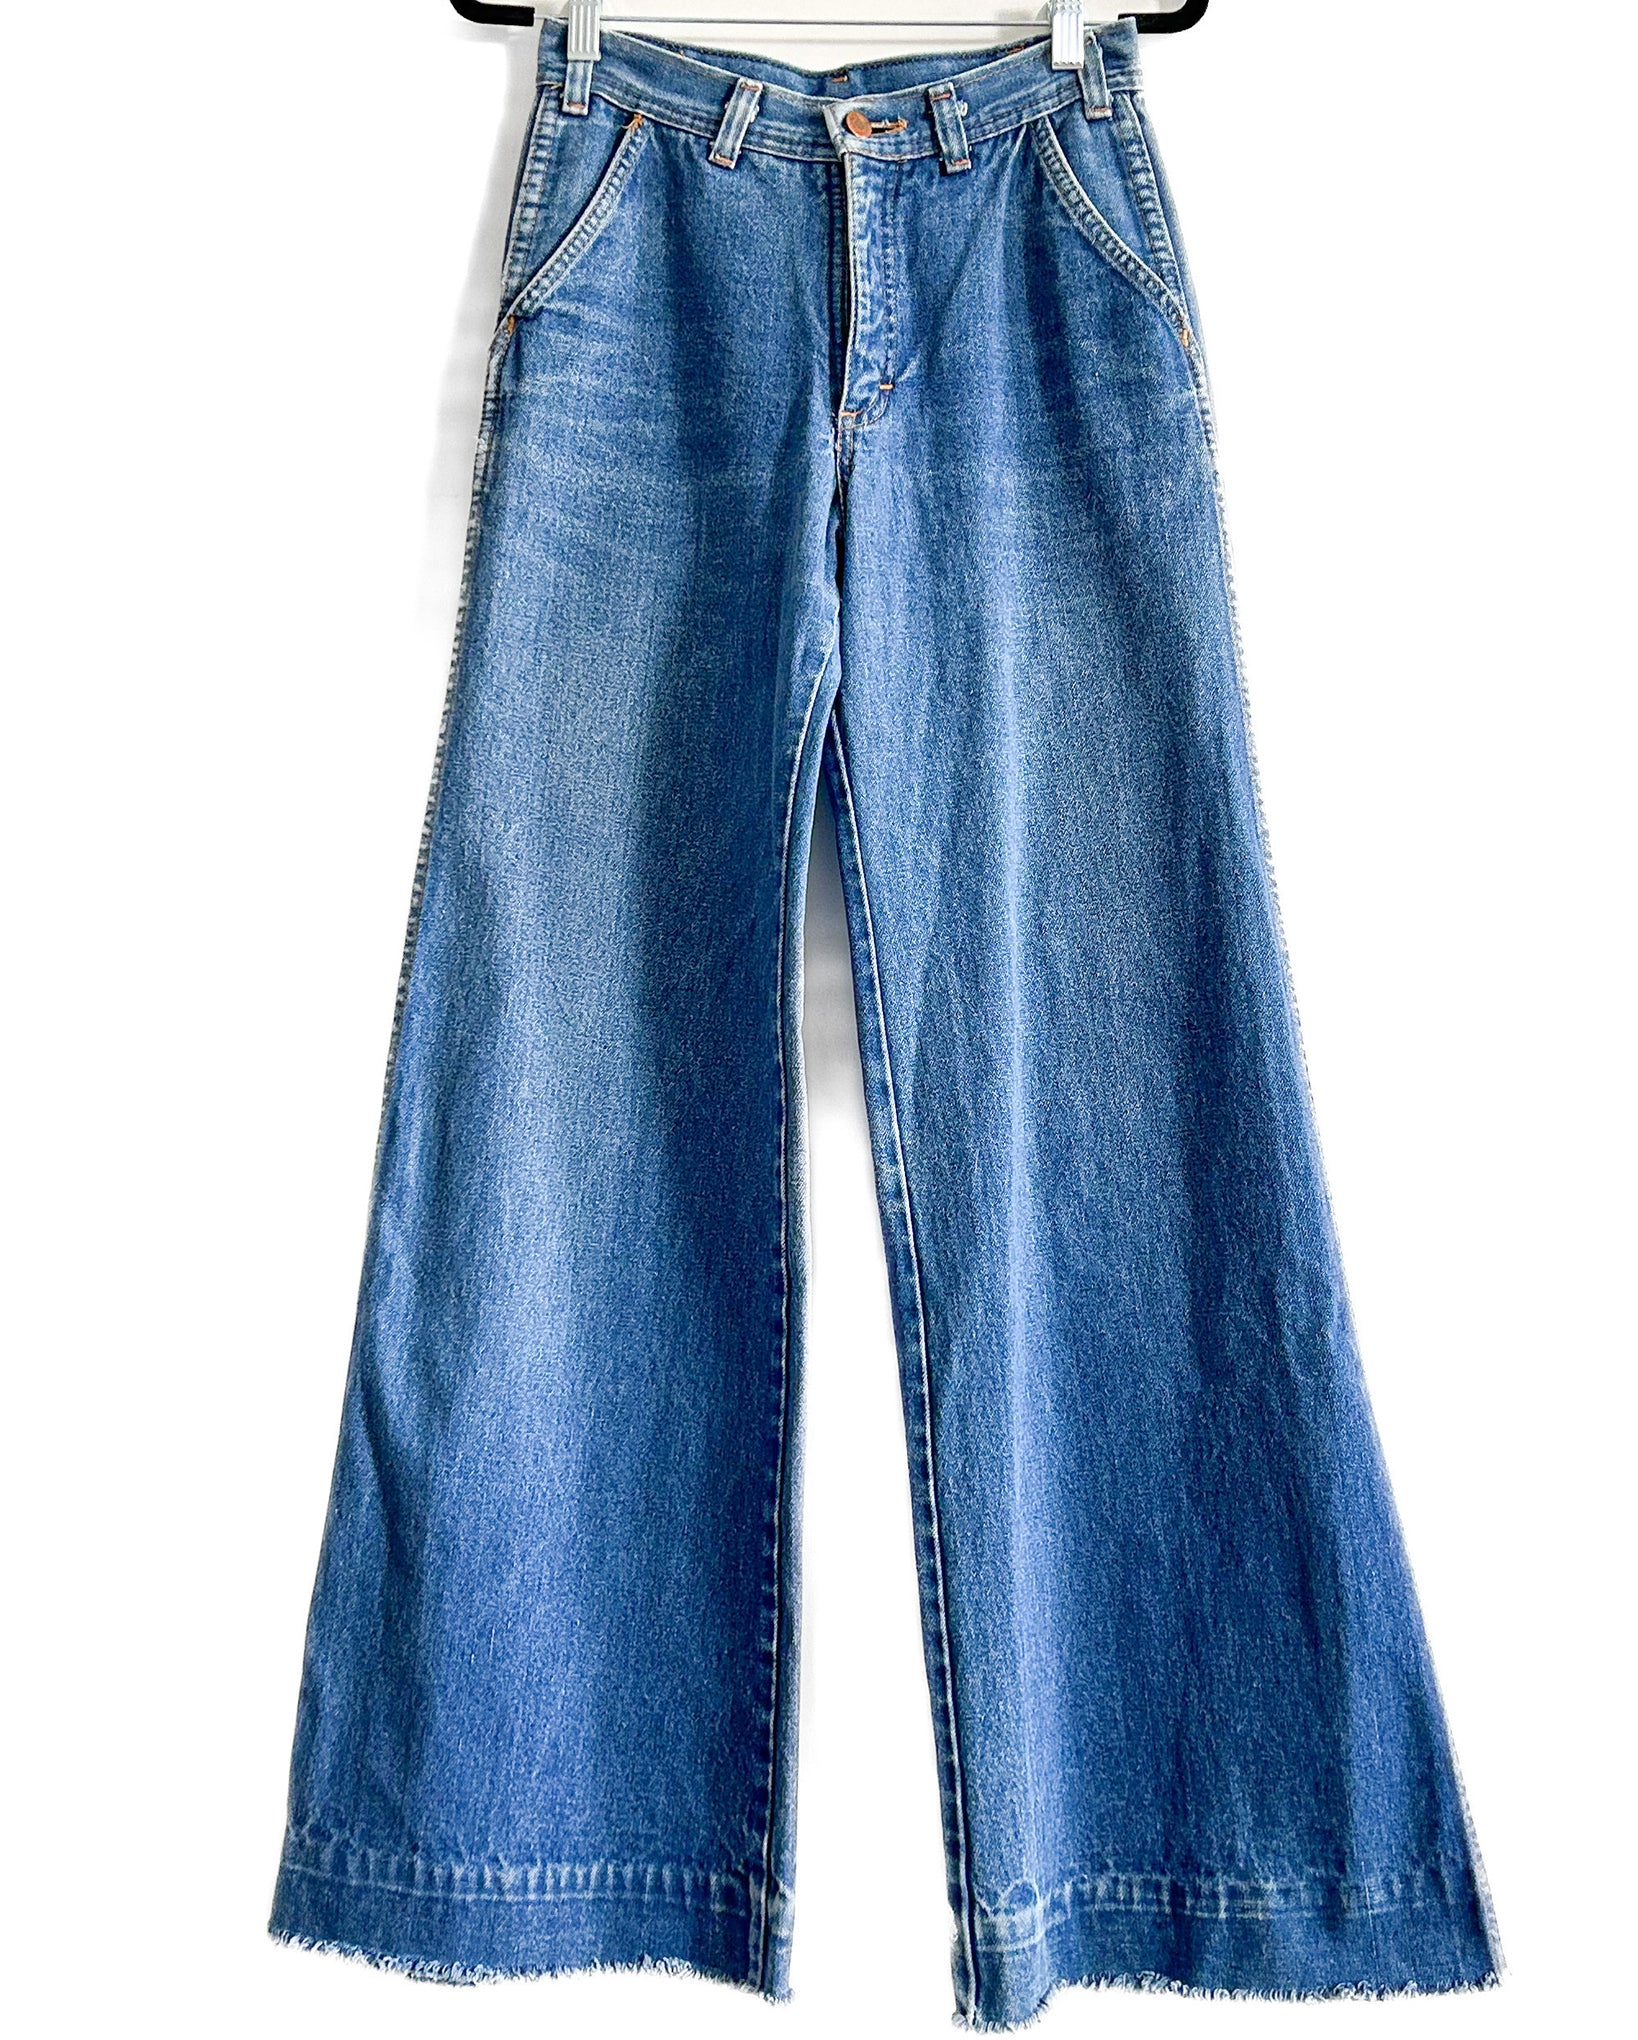 70s Vintage Jeans, High Rise 27” Waist, Wide Leg, Made in Canada